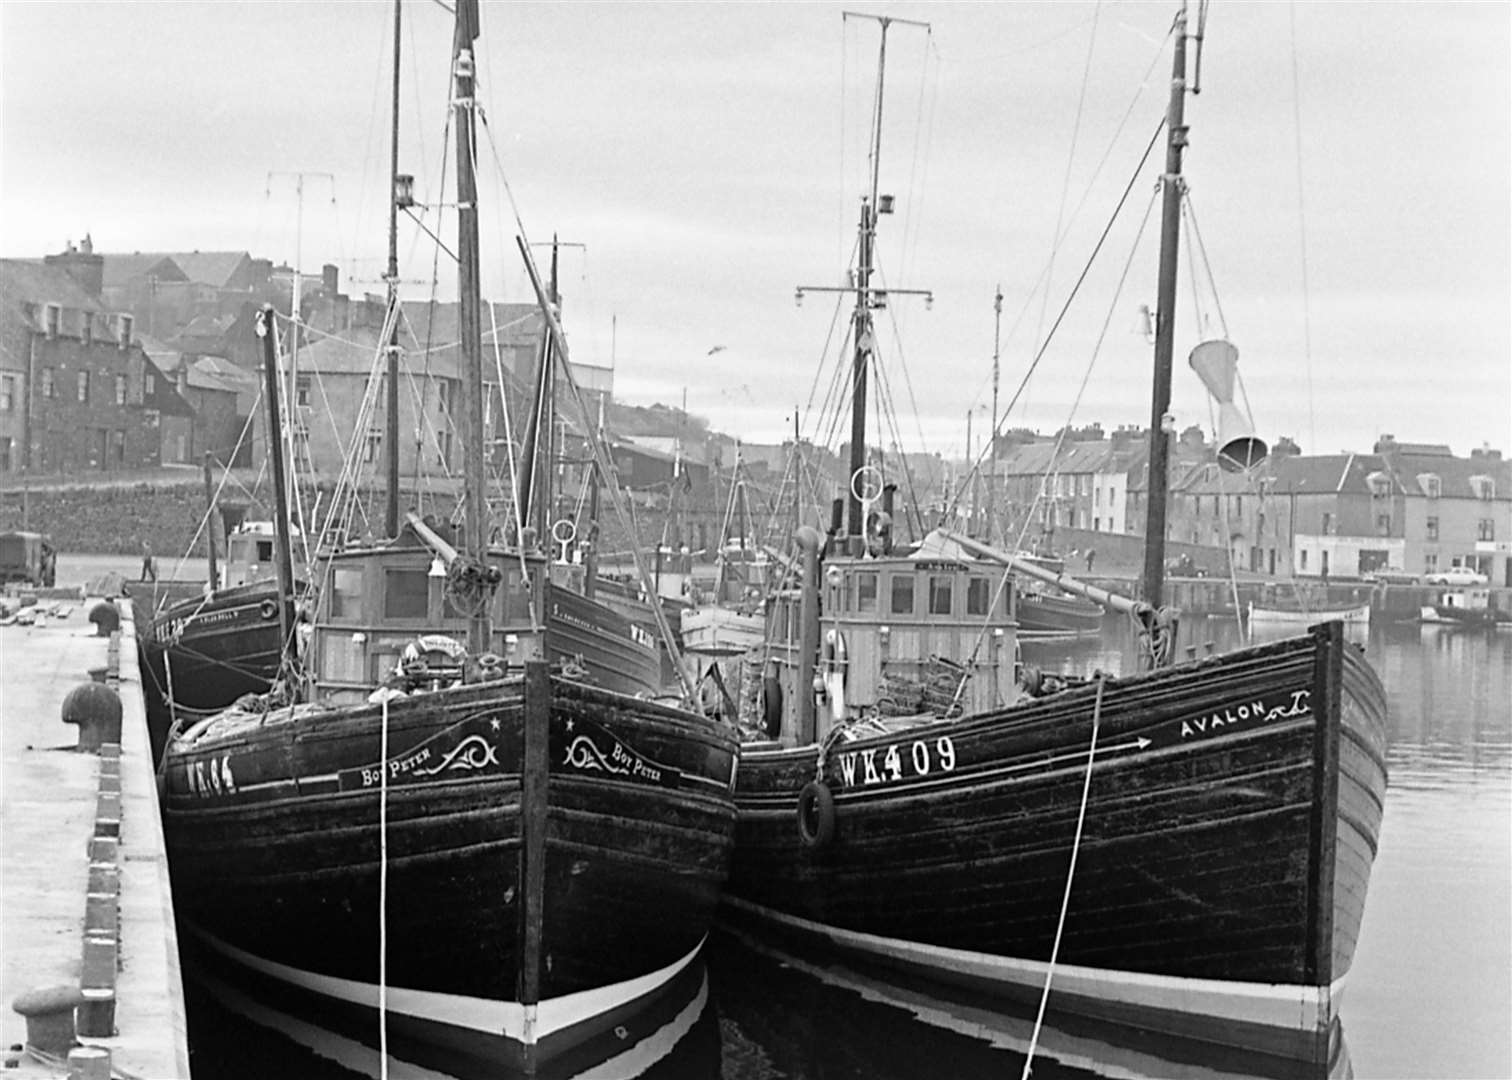 The Boy Peter and Avalon in Wick harbour. Jack Selby Collection / Thurso Heritage Society